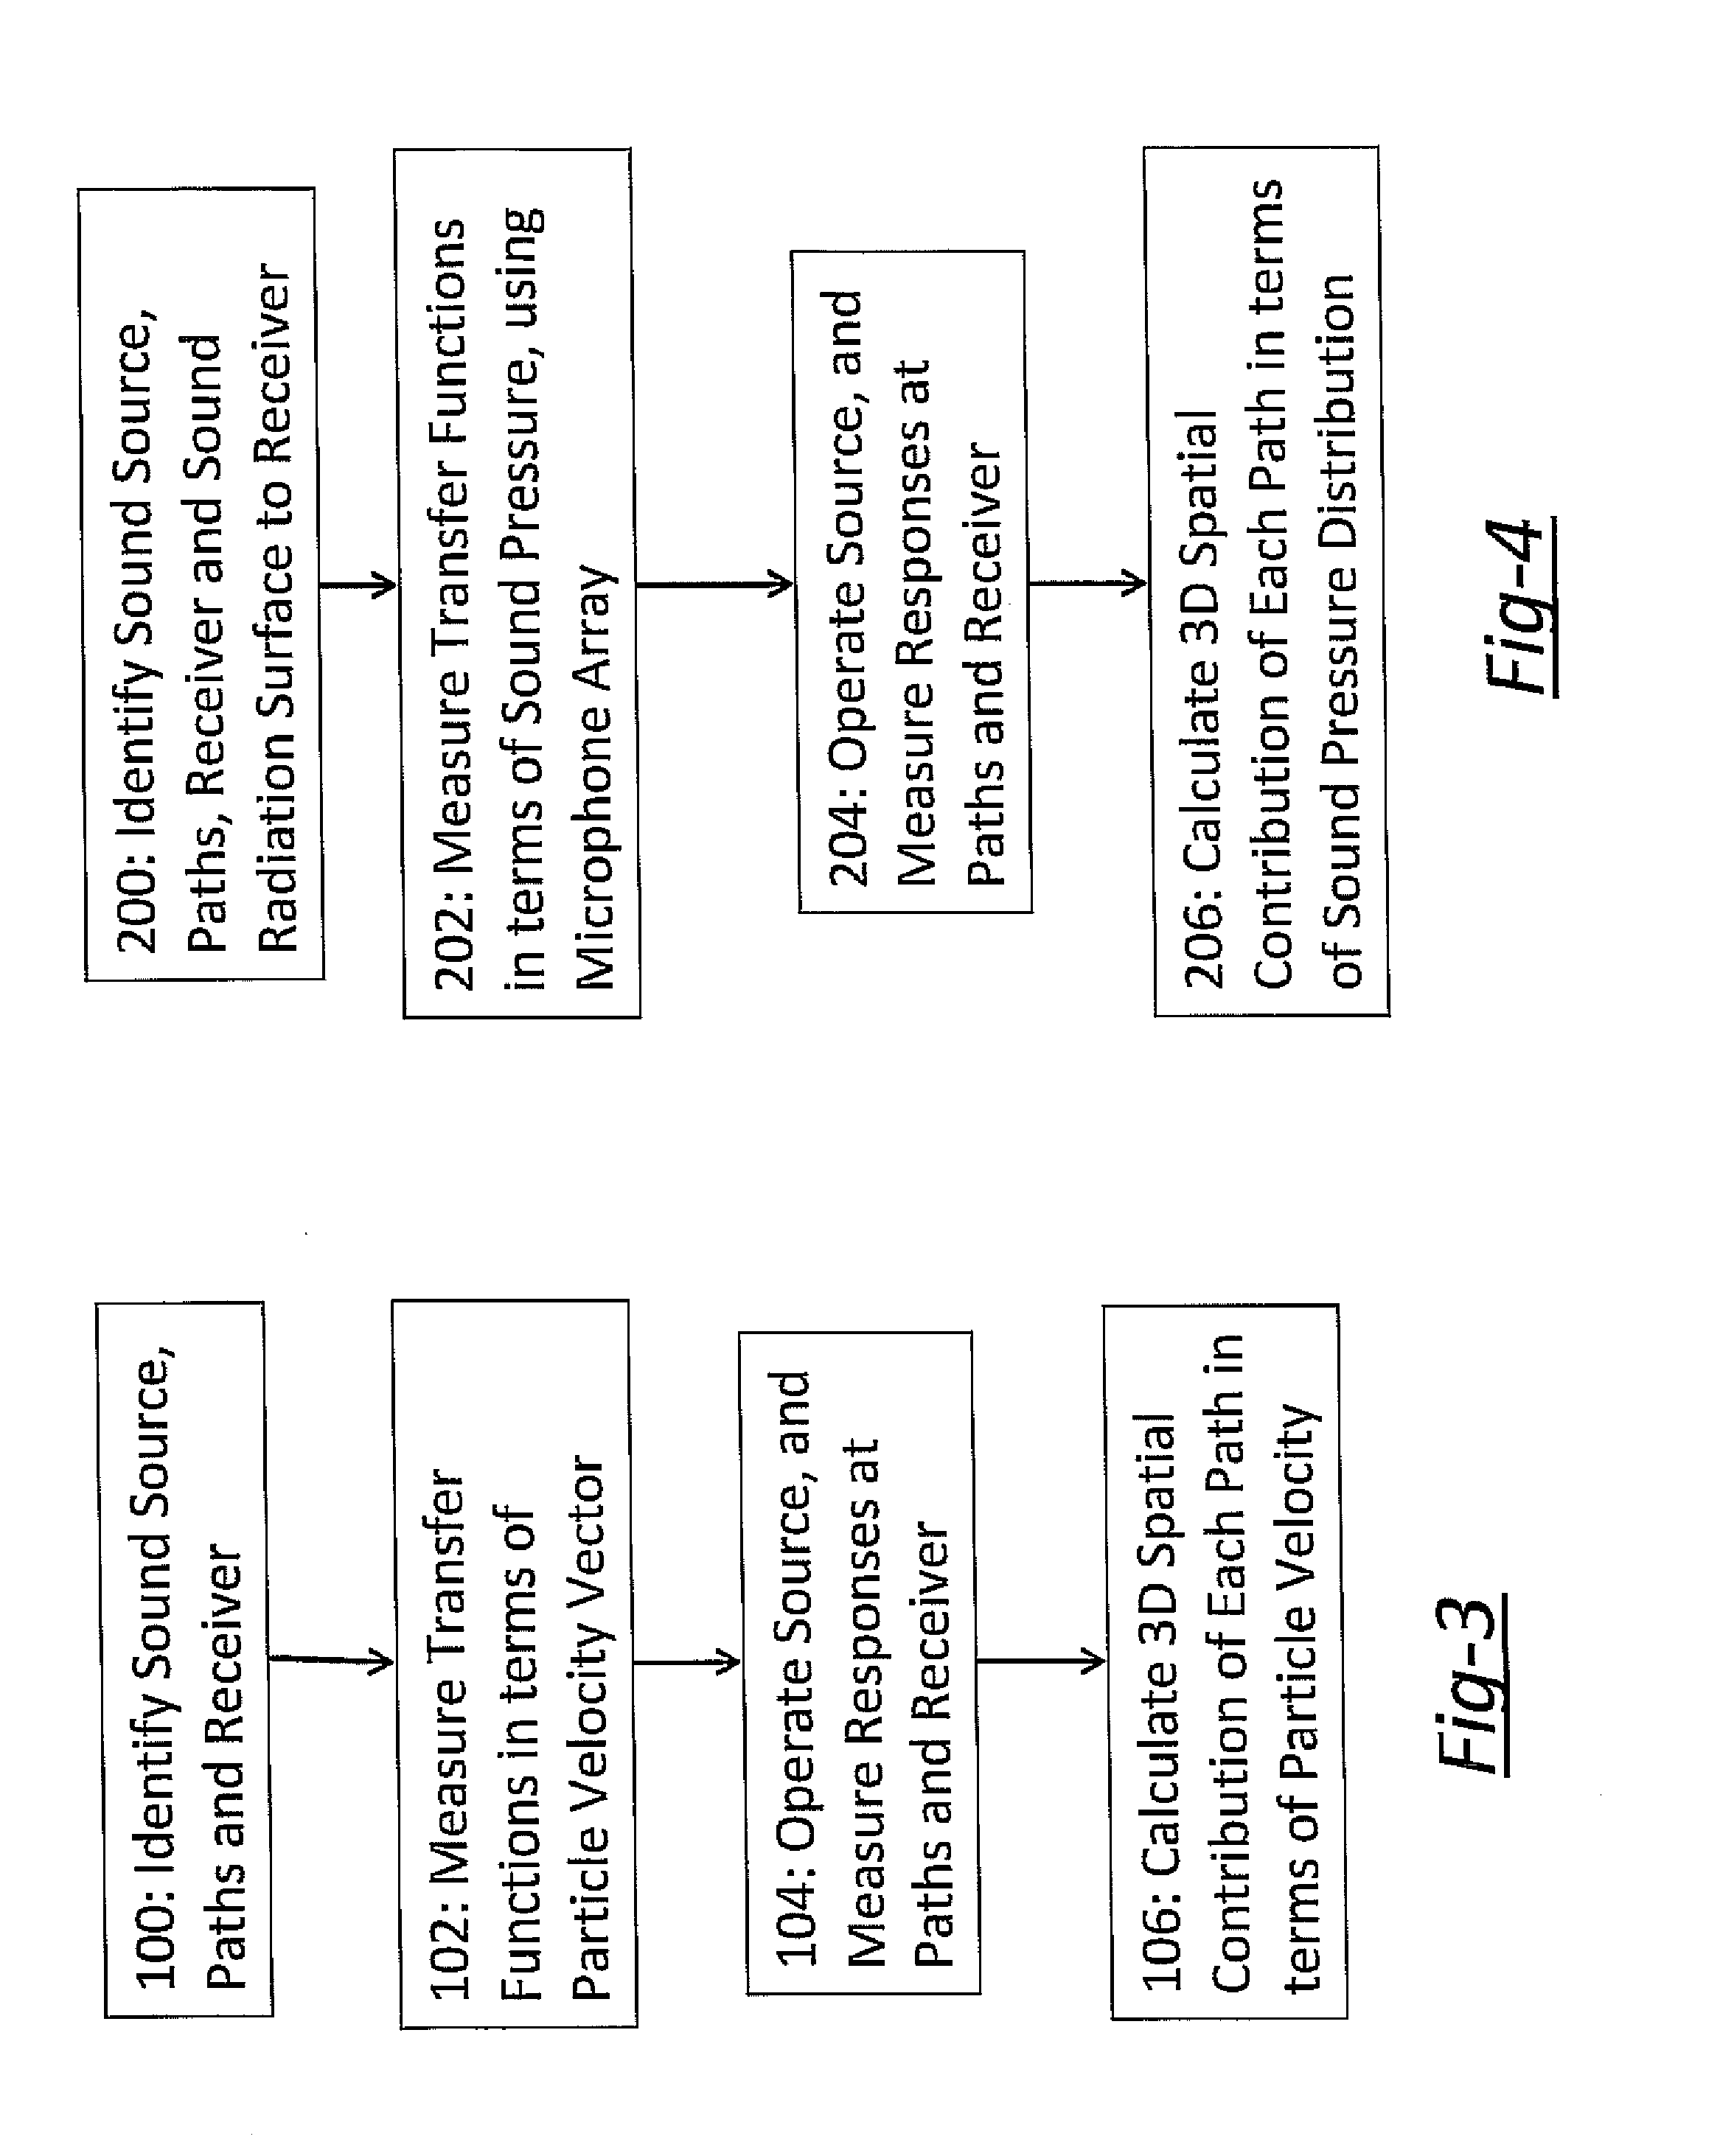 Method for analyzing sound transmission paths in a system